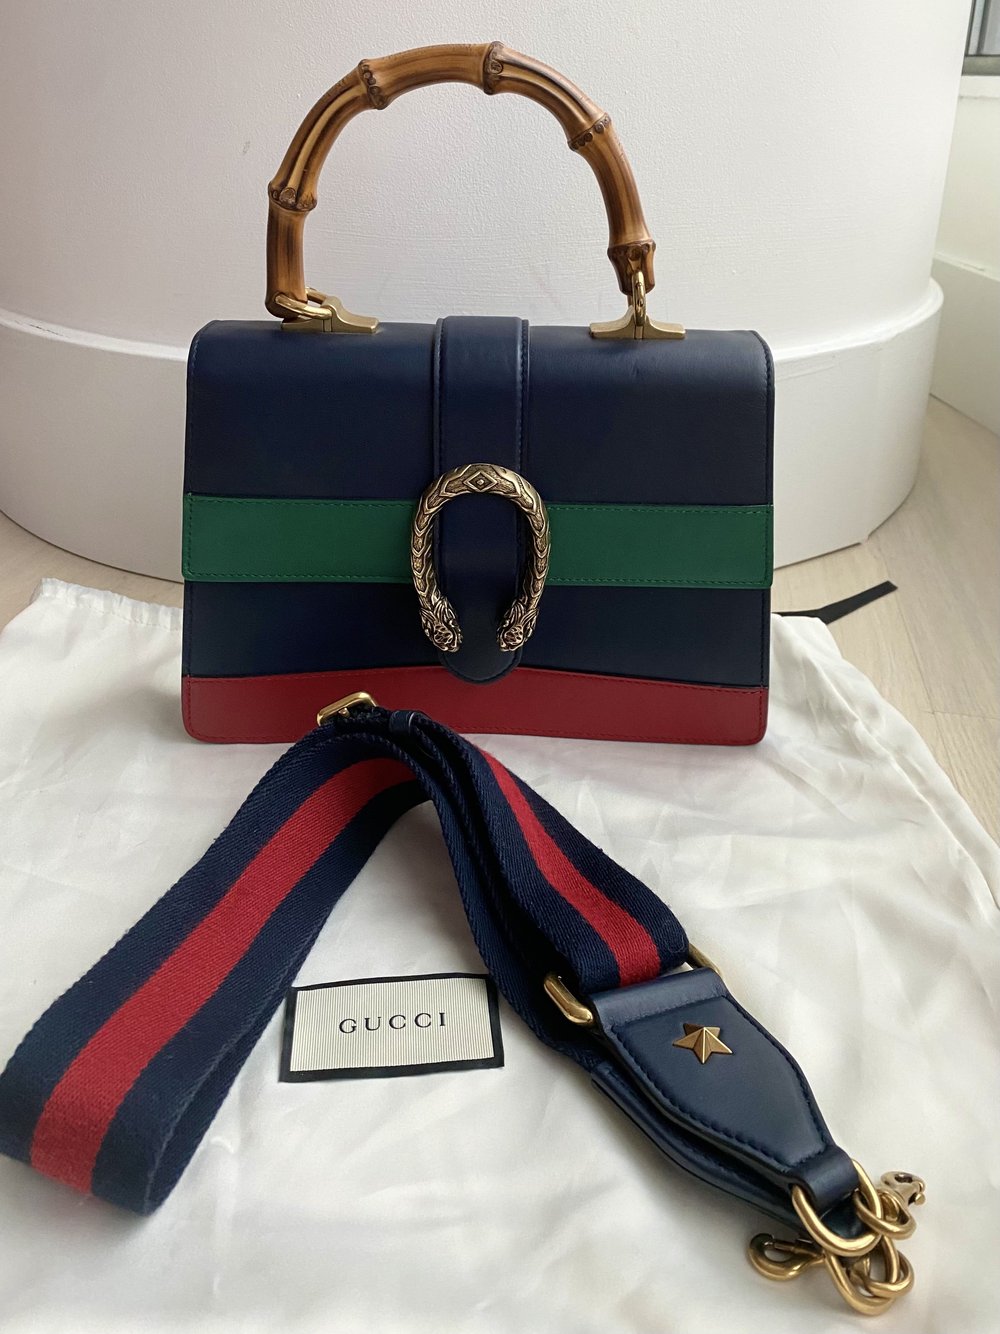 Gucci Dionysus Bamboo Top Handle Bag — DESIGNER TAKEAWAY BY QUEEN OF LUXURY  BOUTIQUE INC.